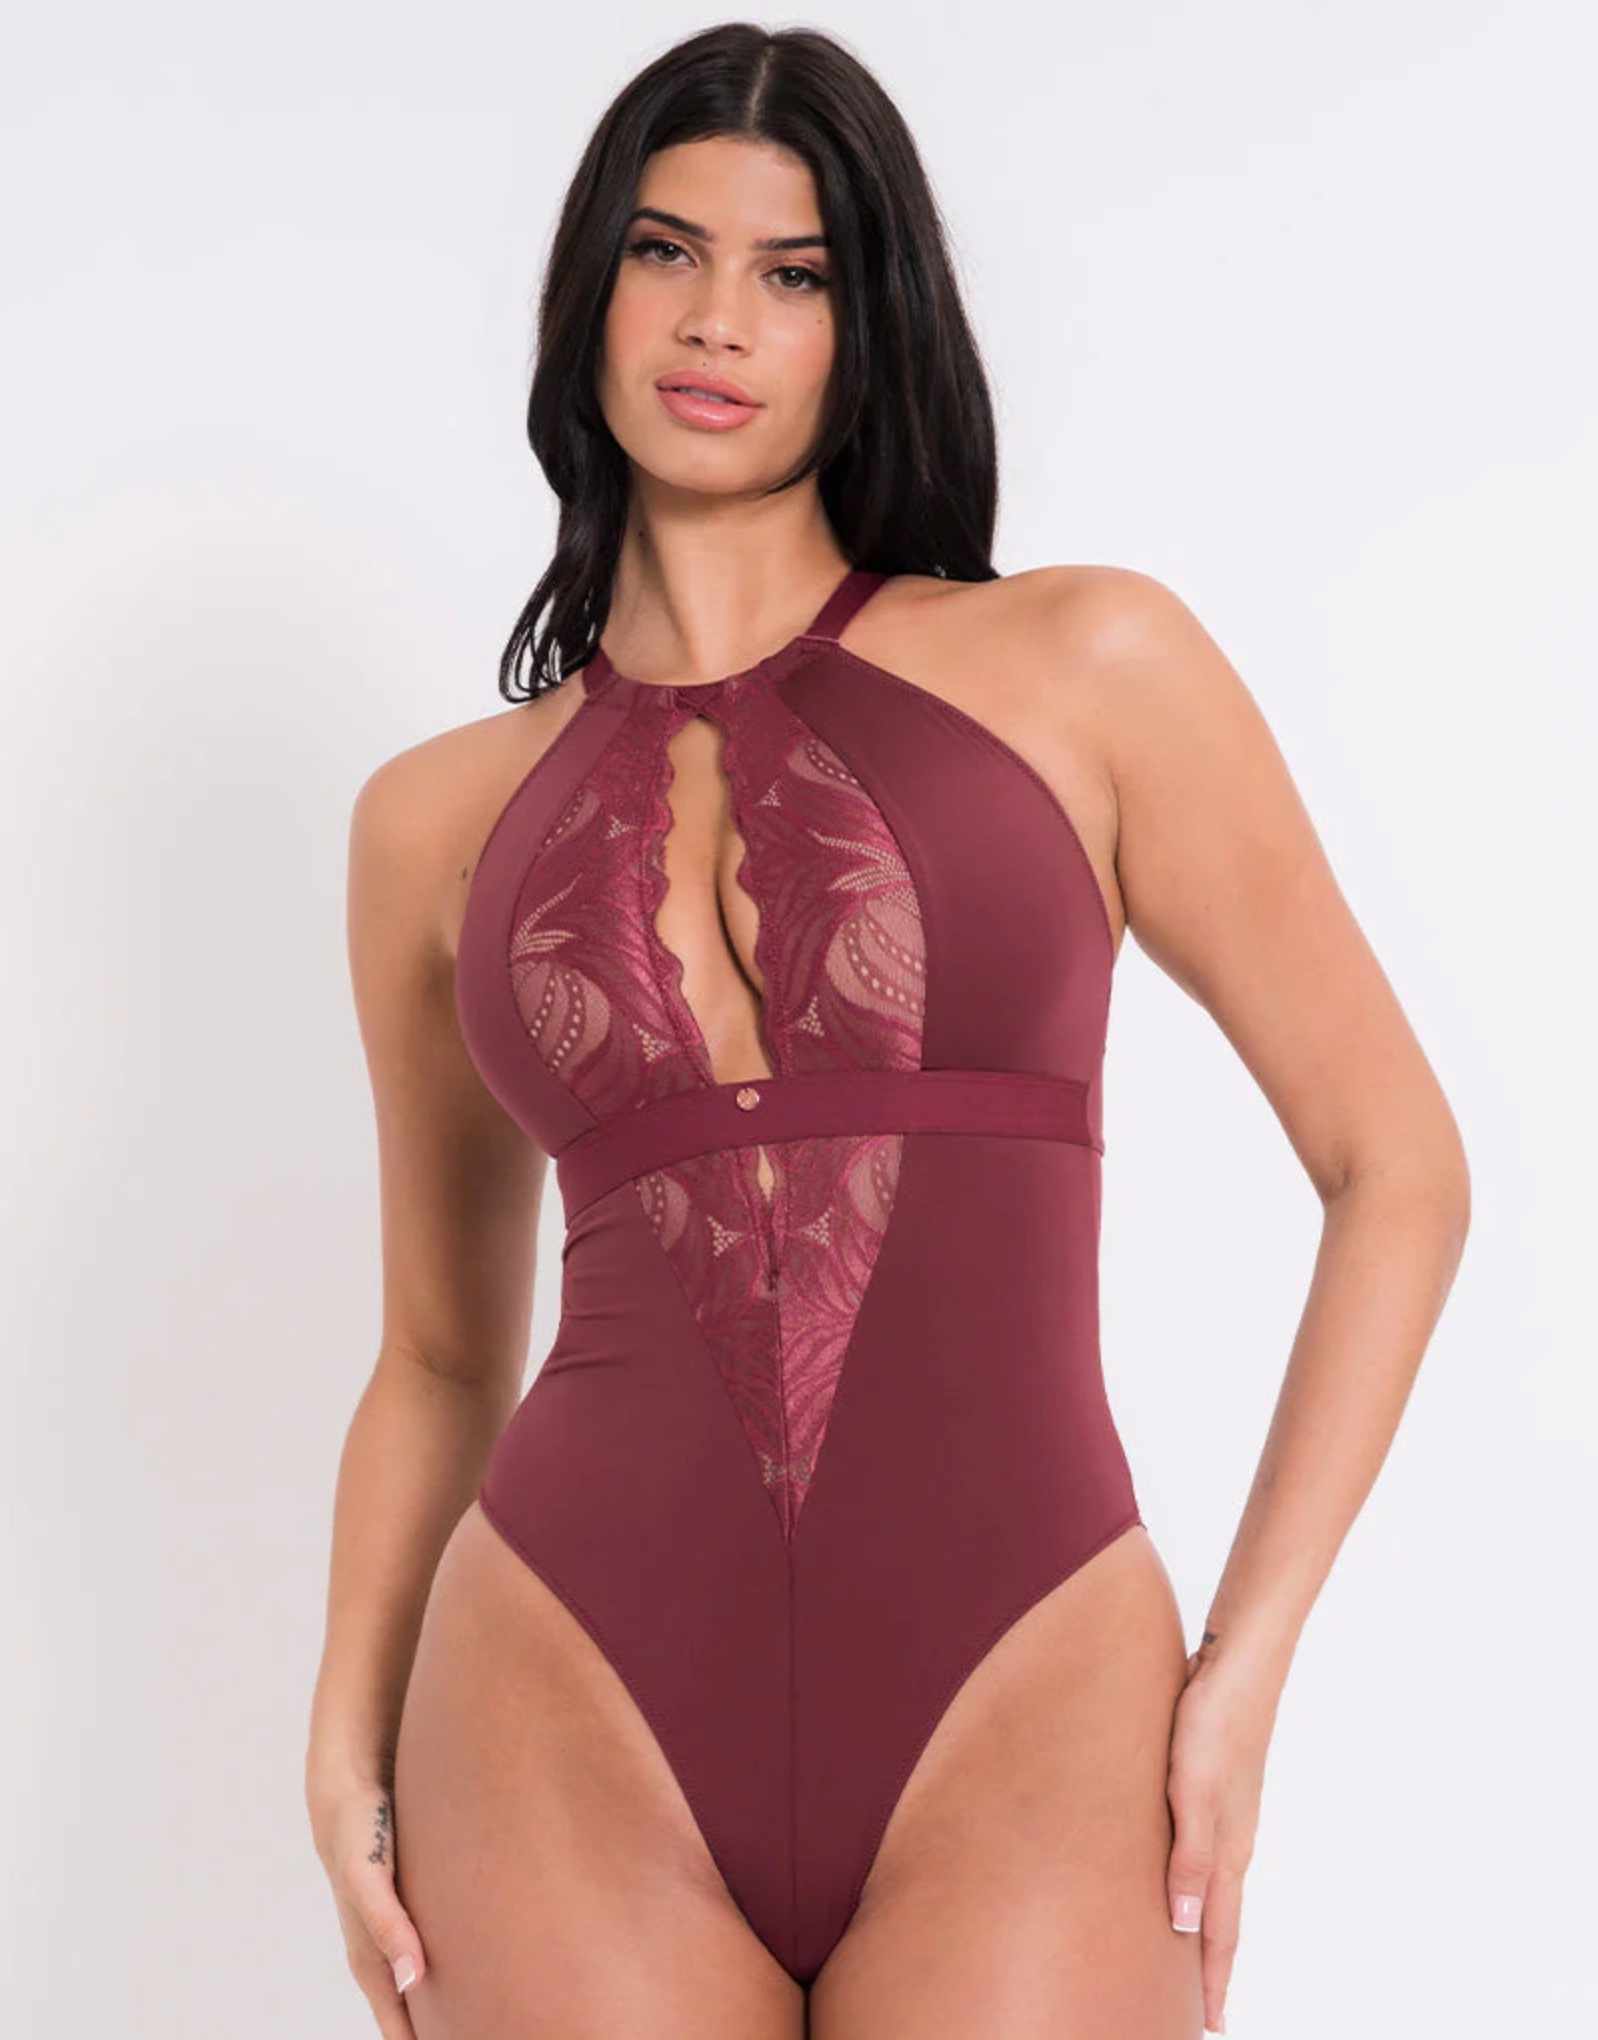 Scantilly Indulgence Stretch Lace Bodysuit - Oxblood Red - Curvy